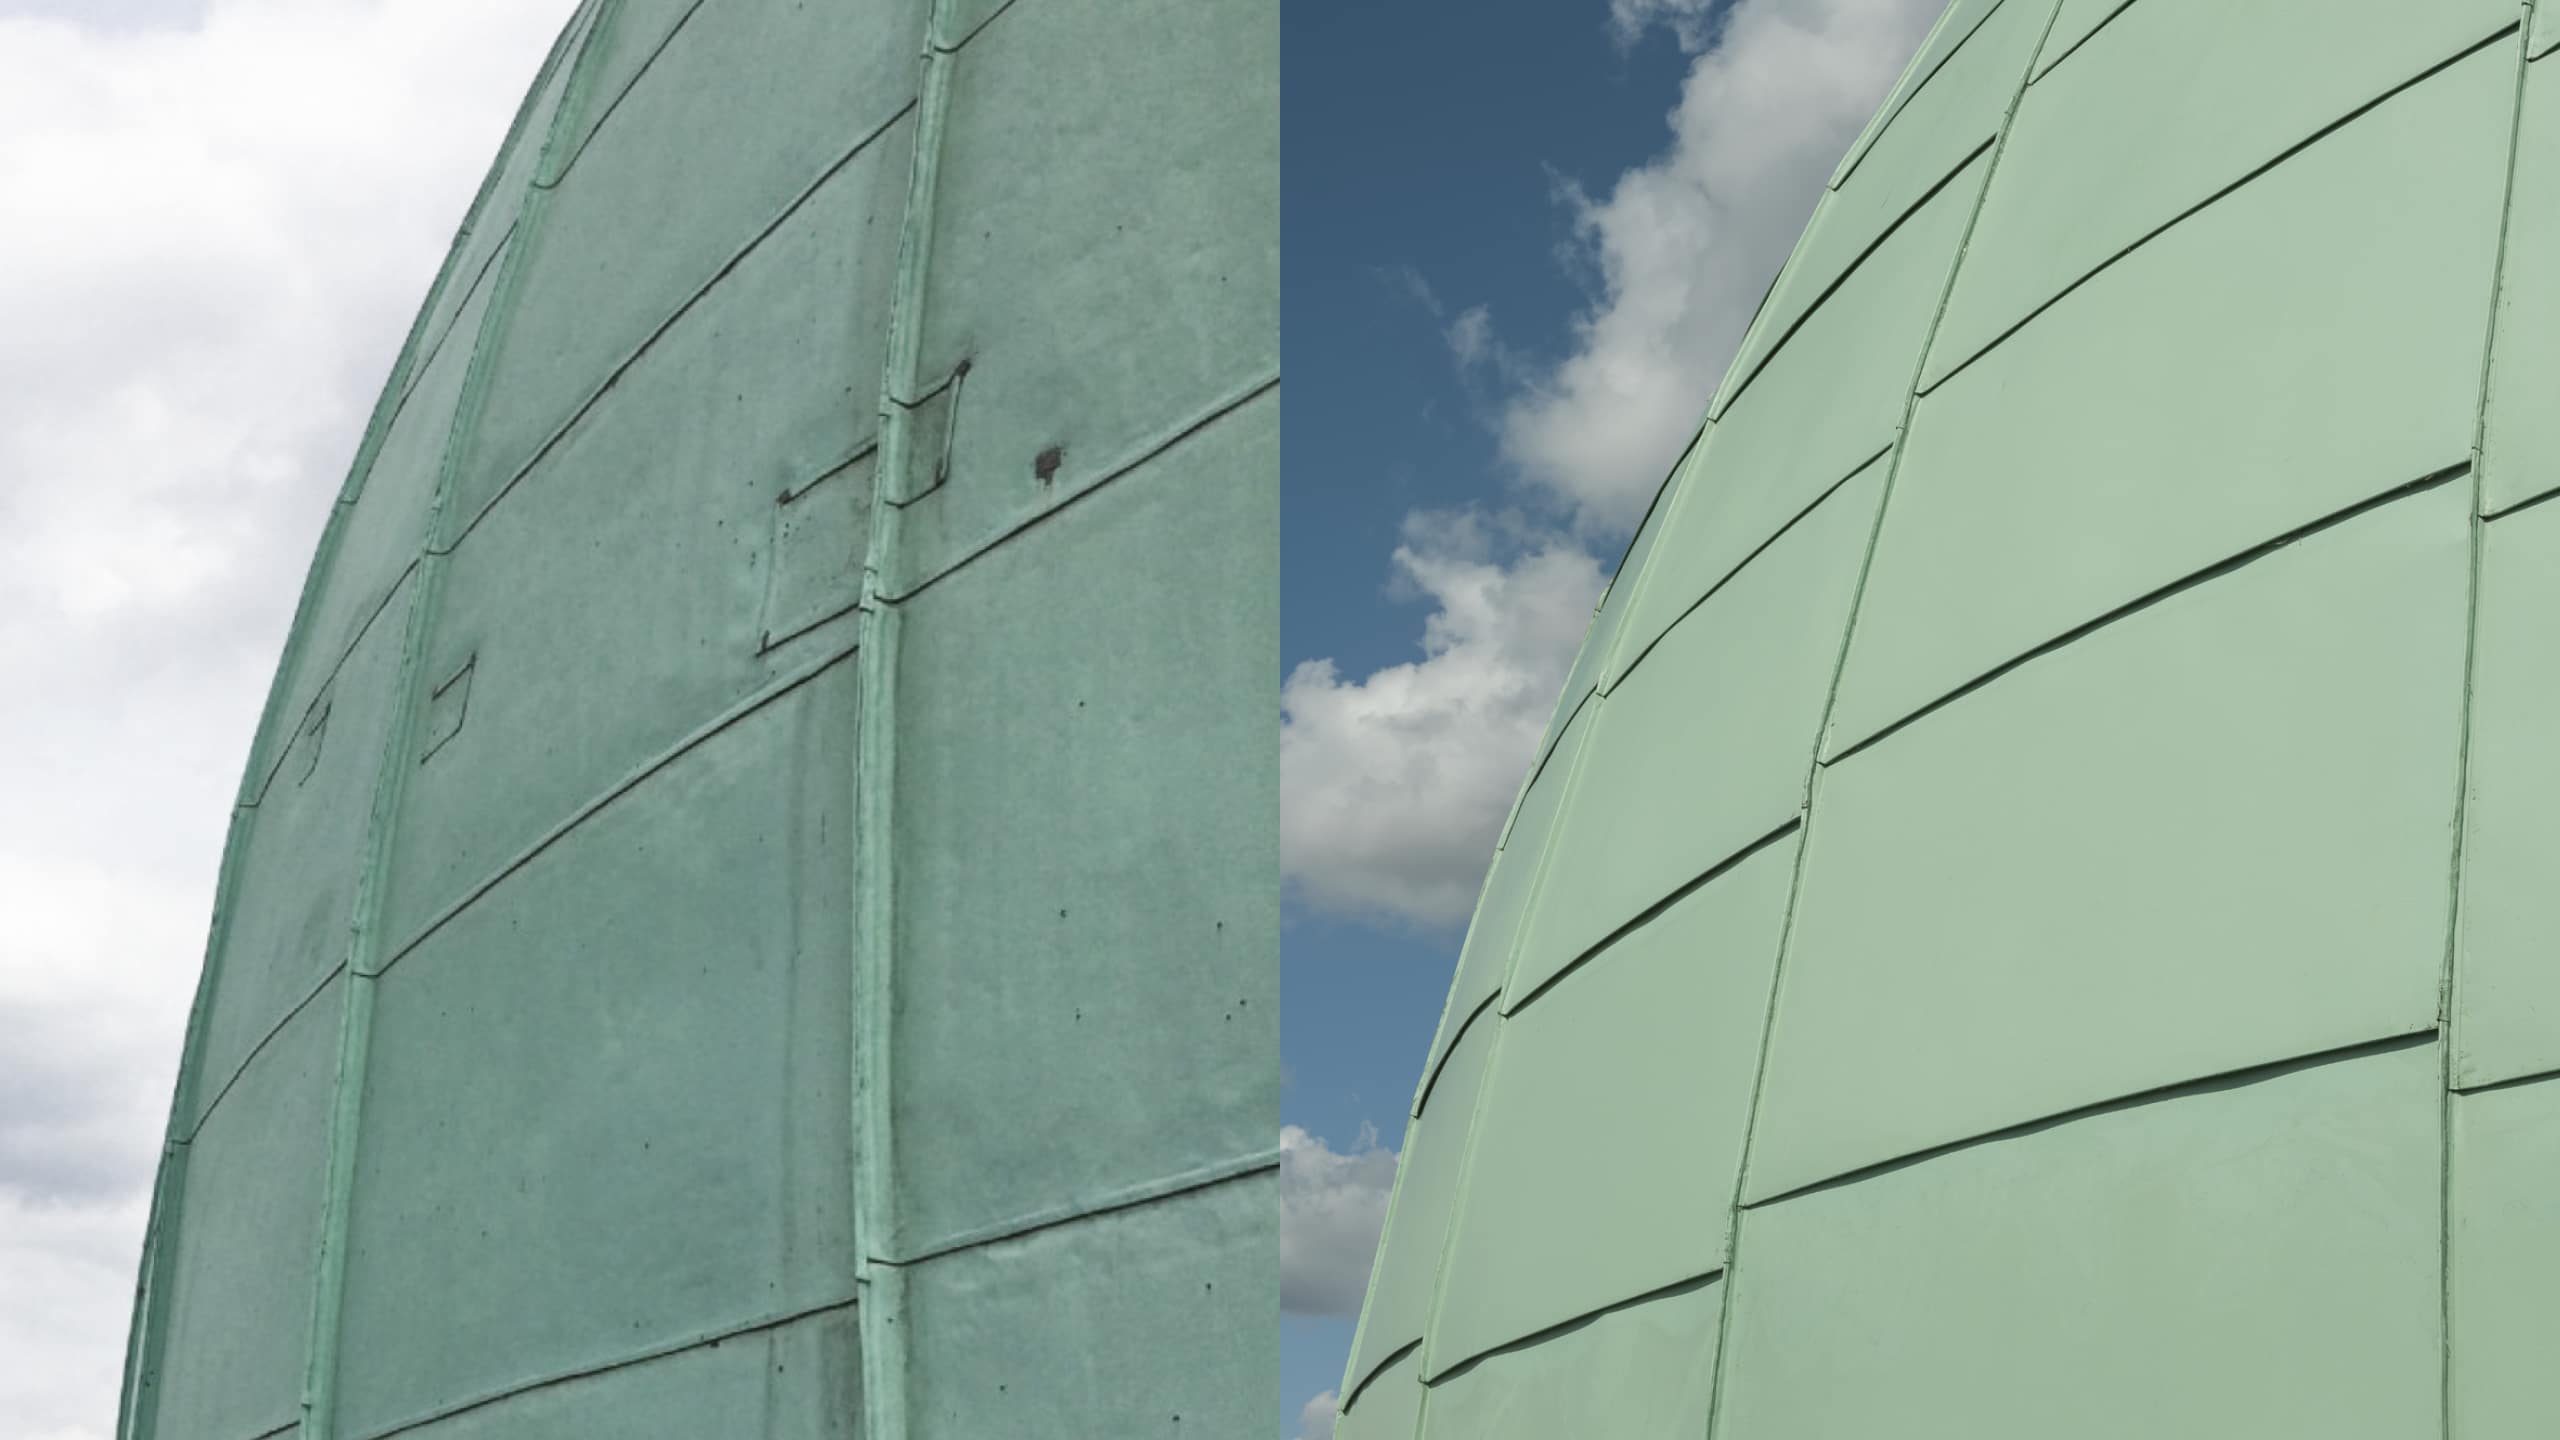 BEFORE / AFTER Anzeiger-Hochhaus in Hannover, Germany